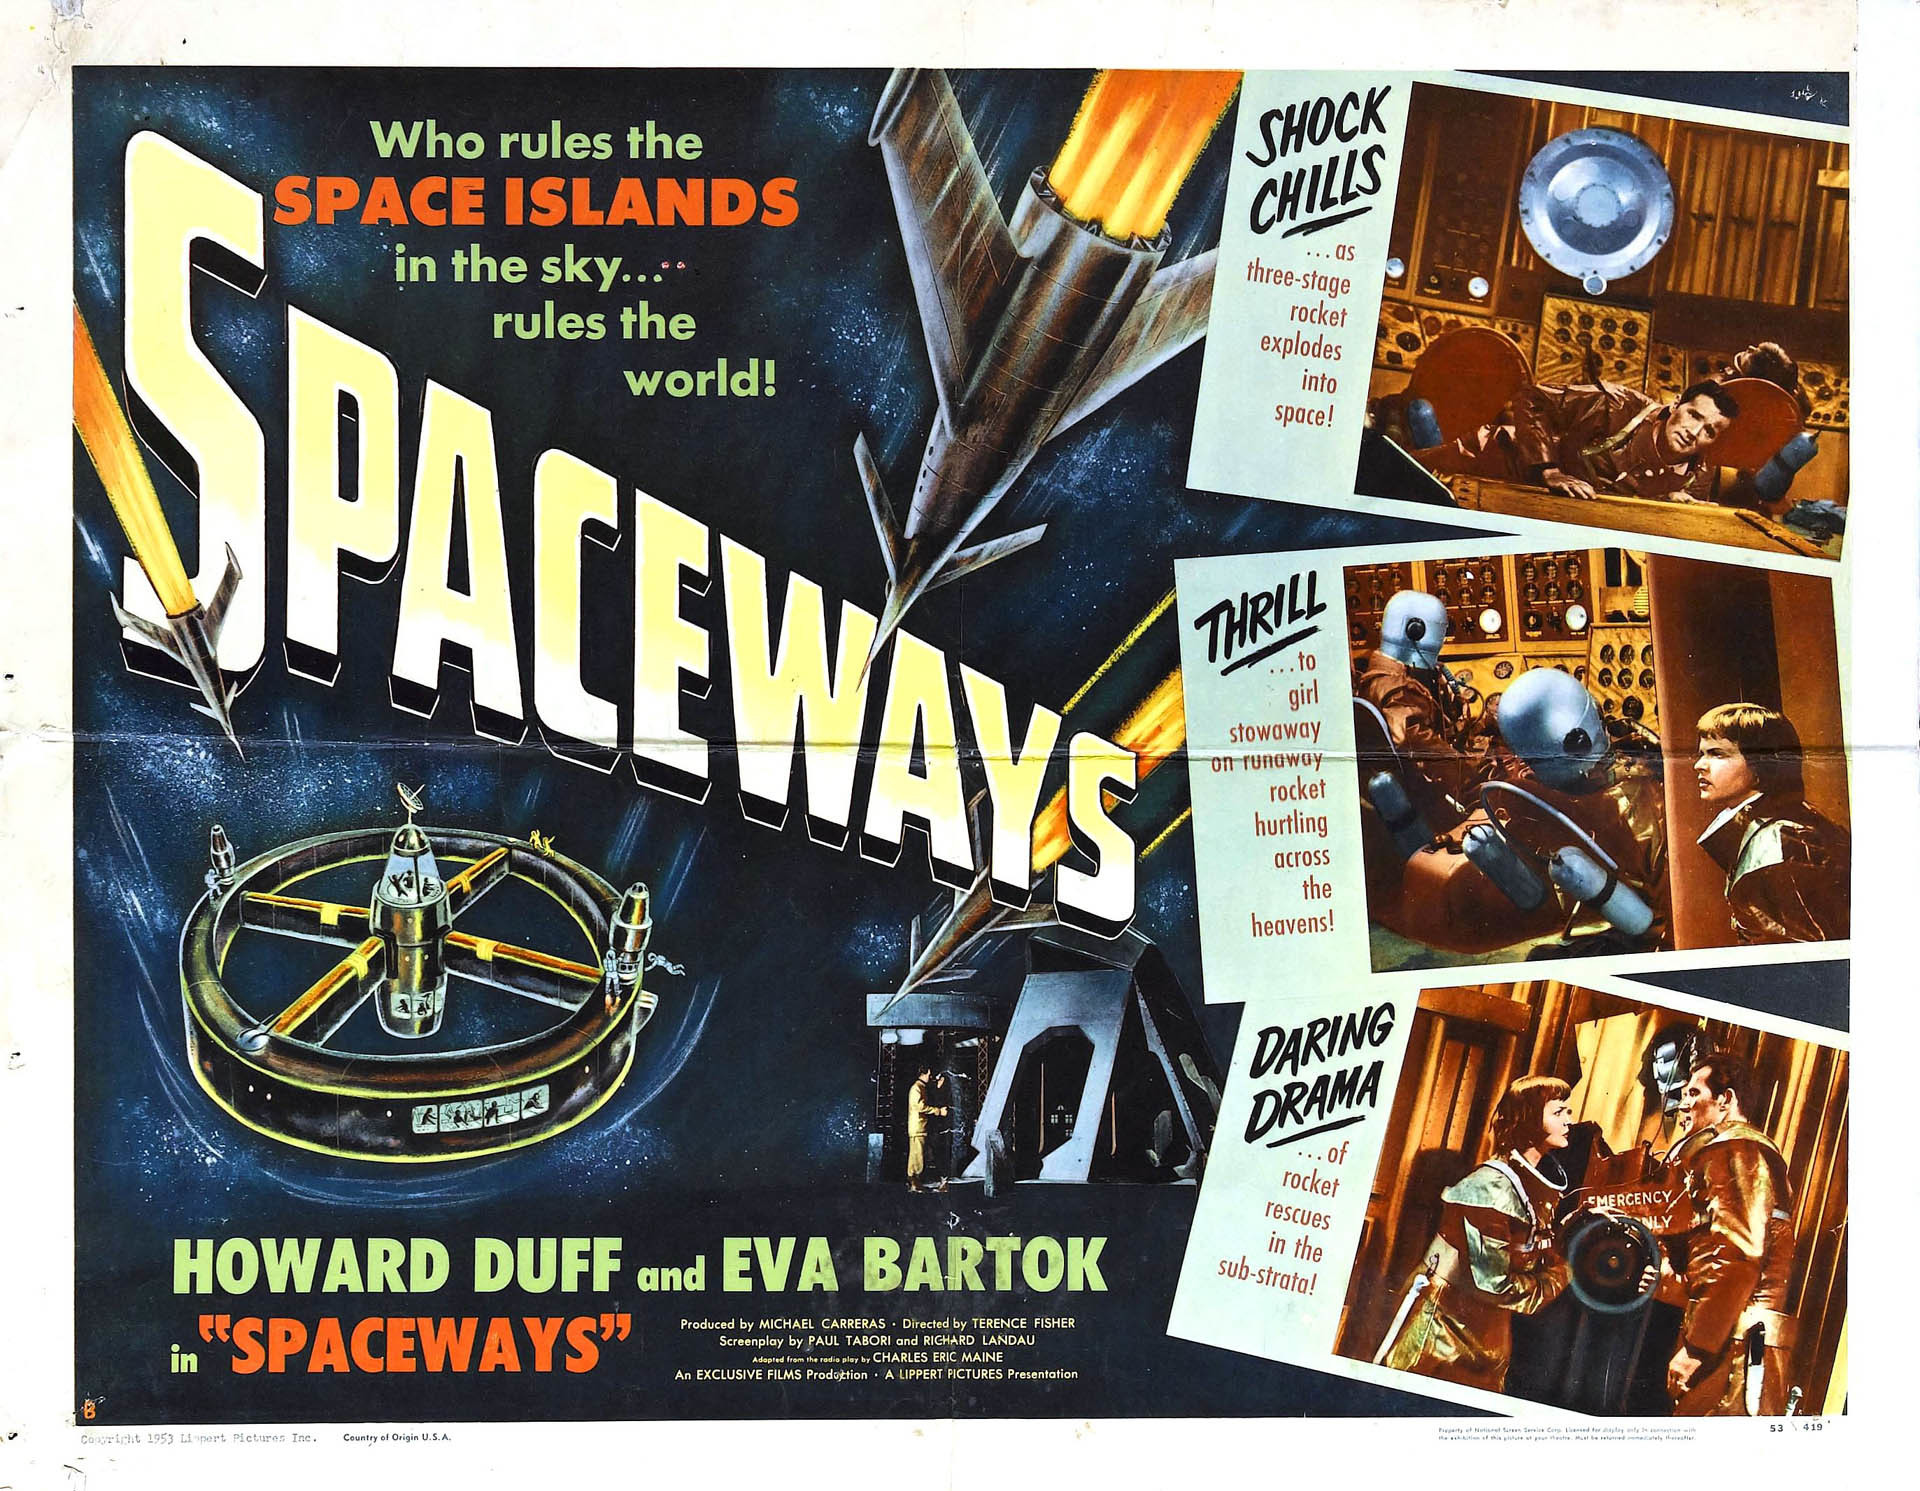 1920x1491 Spaceways - Wallpaper Image featuring 1950s B Movie Posters